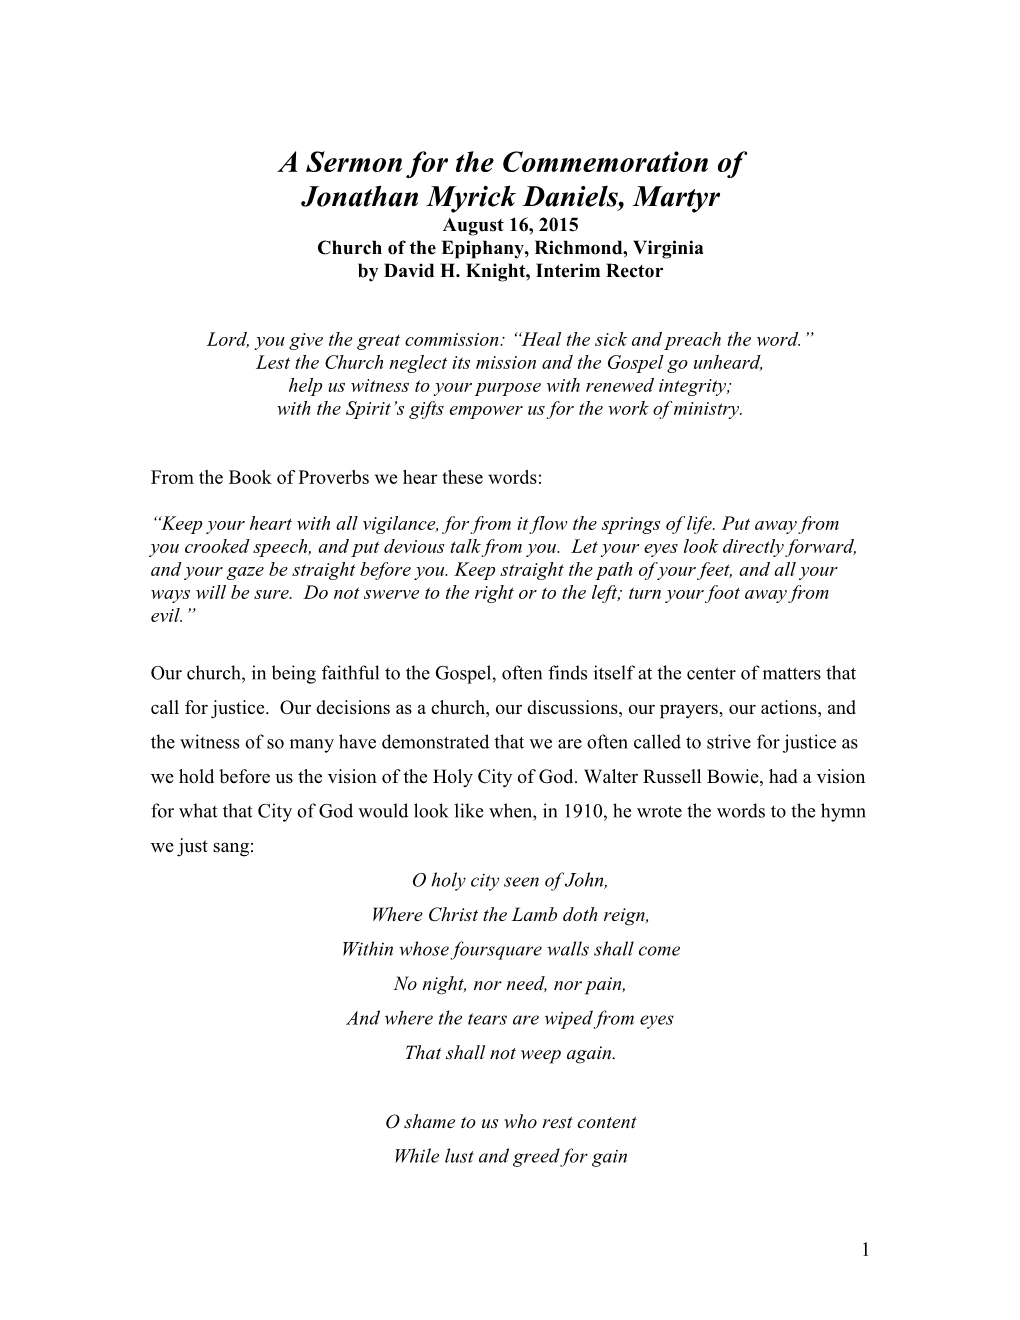 A Sermon for the Commemoration of Jonathan Myrick Daniels, Martyr August 16, 2015 Church of the Epiphany, Richmond, Virginia by David H